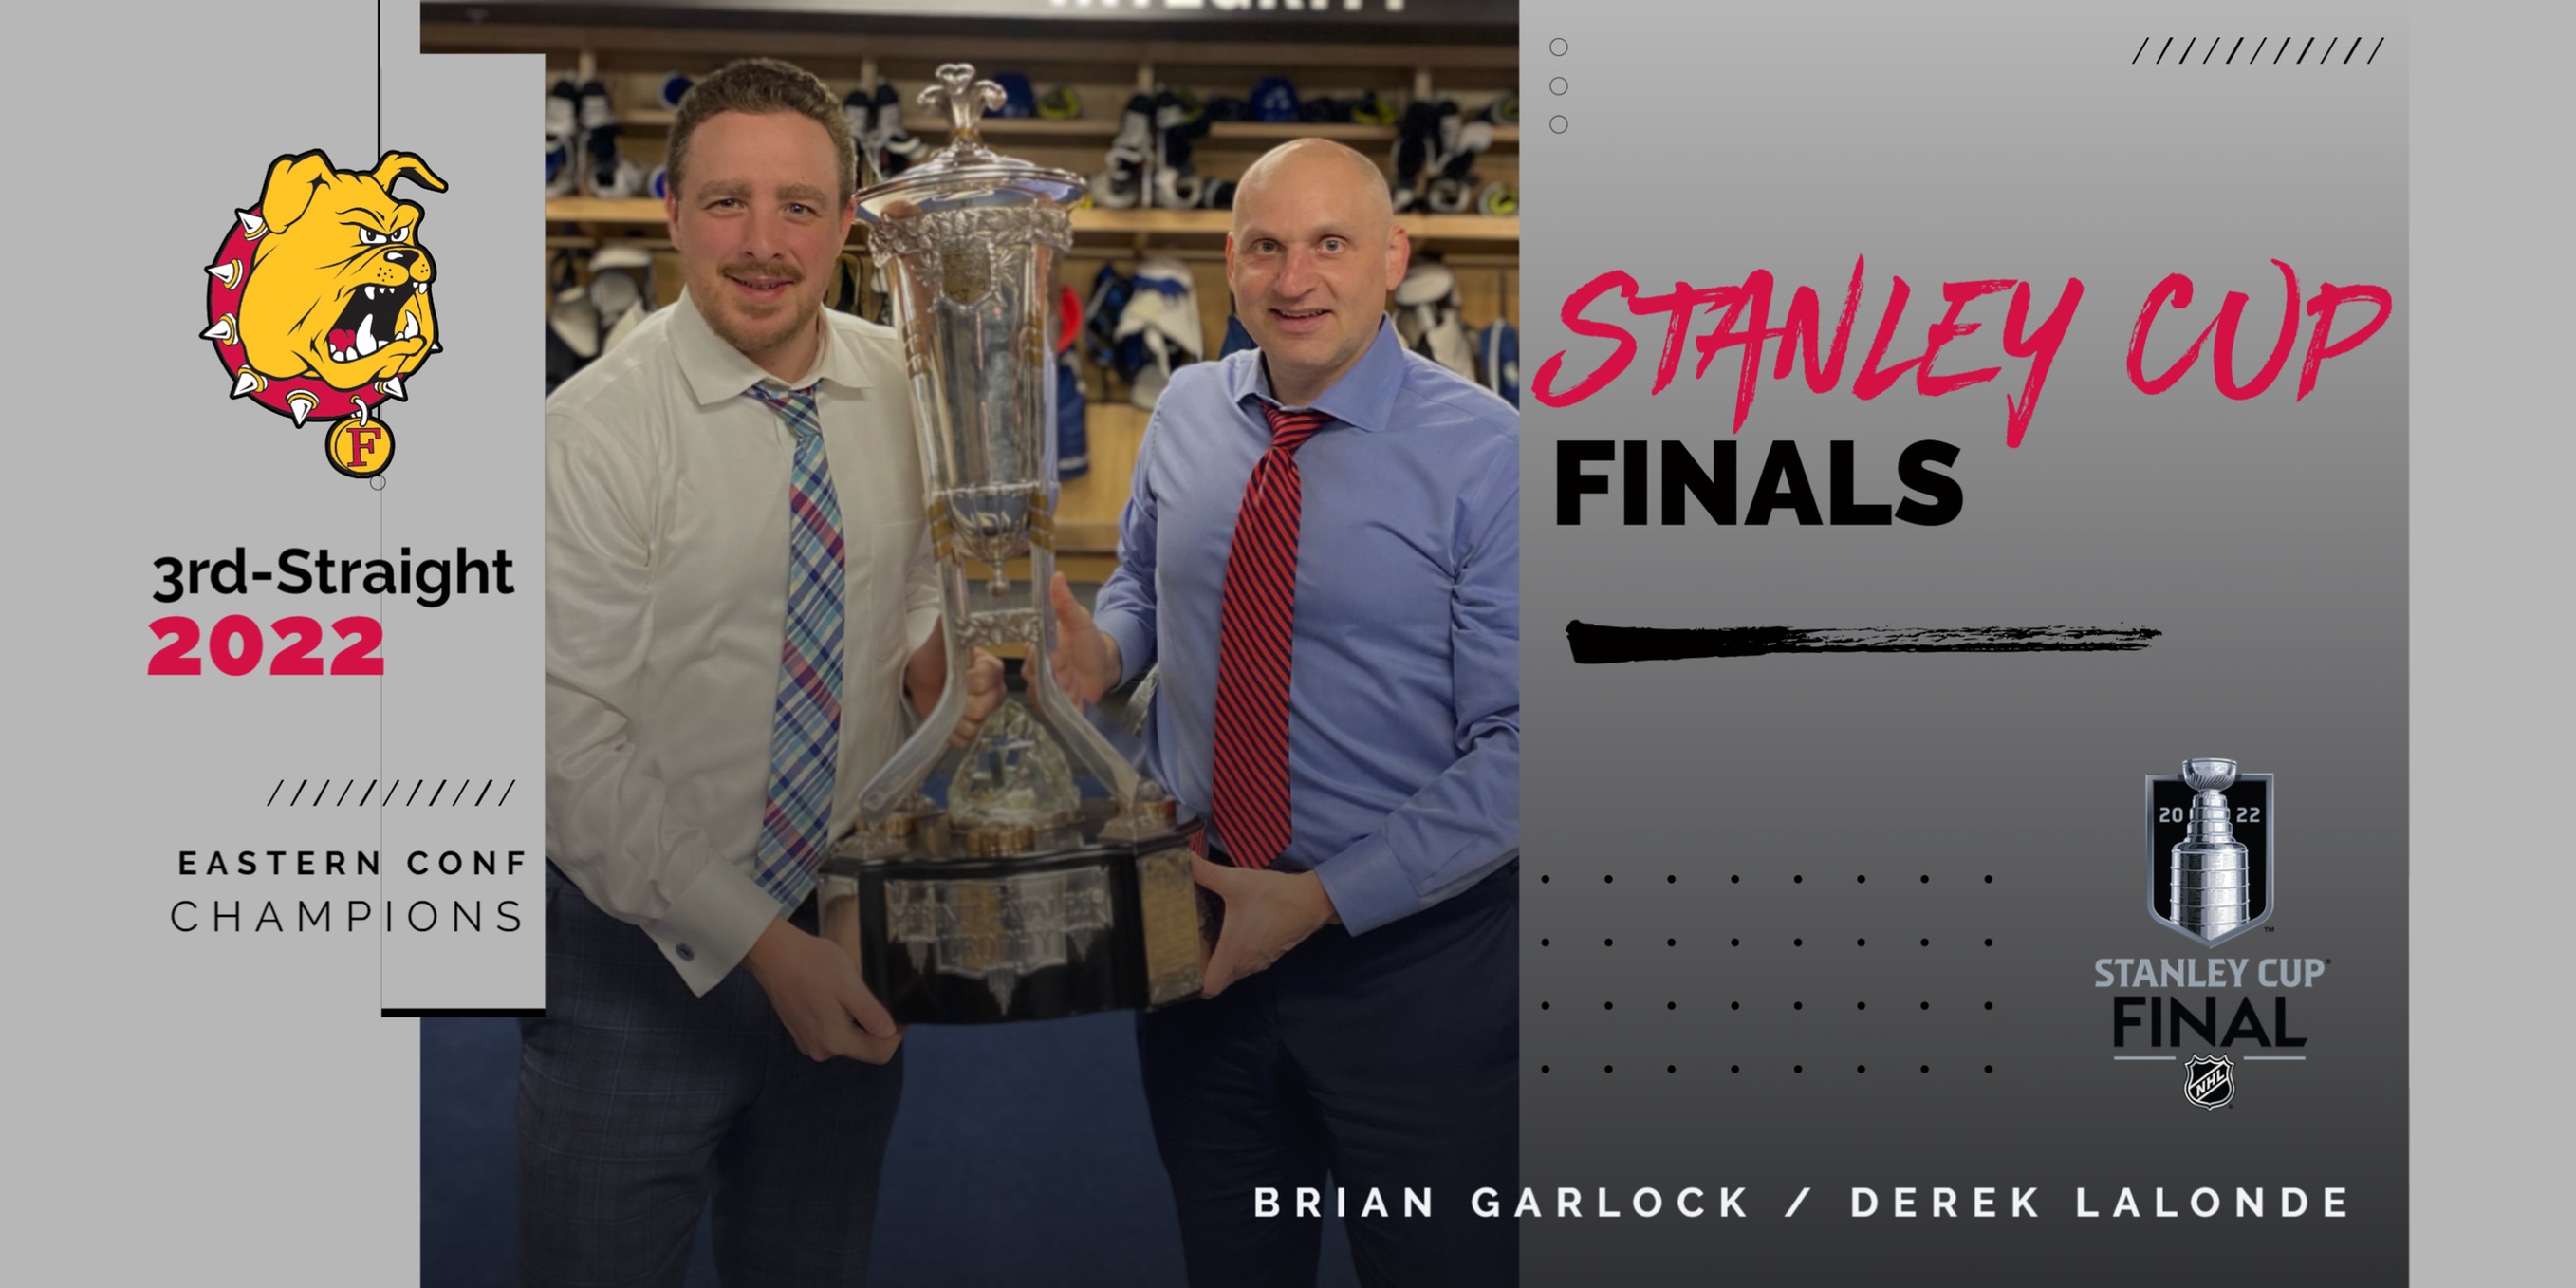 Former Bulldogs Help Tampa Bay Achieve Third Consecutive Stanley Cup Finals Appearance